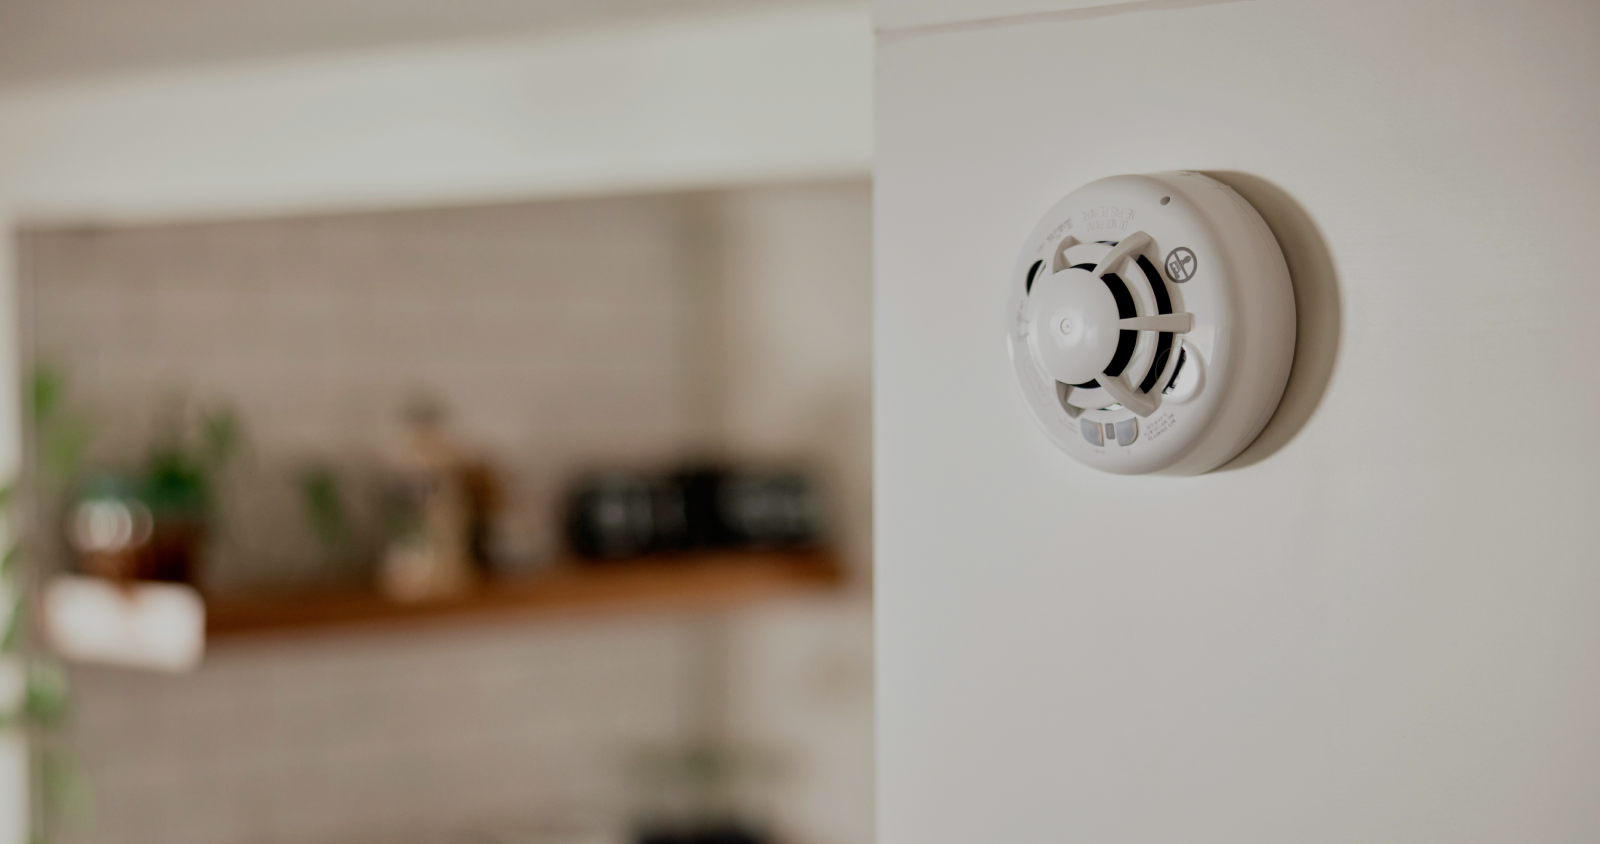 Why You Need Heat & Carbon Monoxide Detectors In A Garage